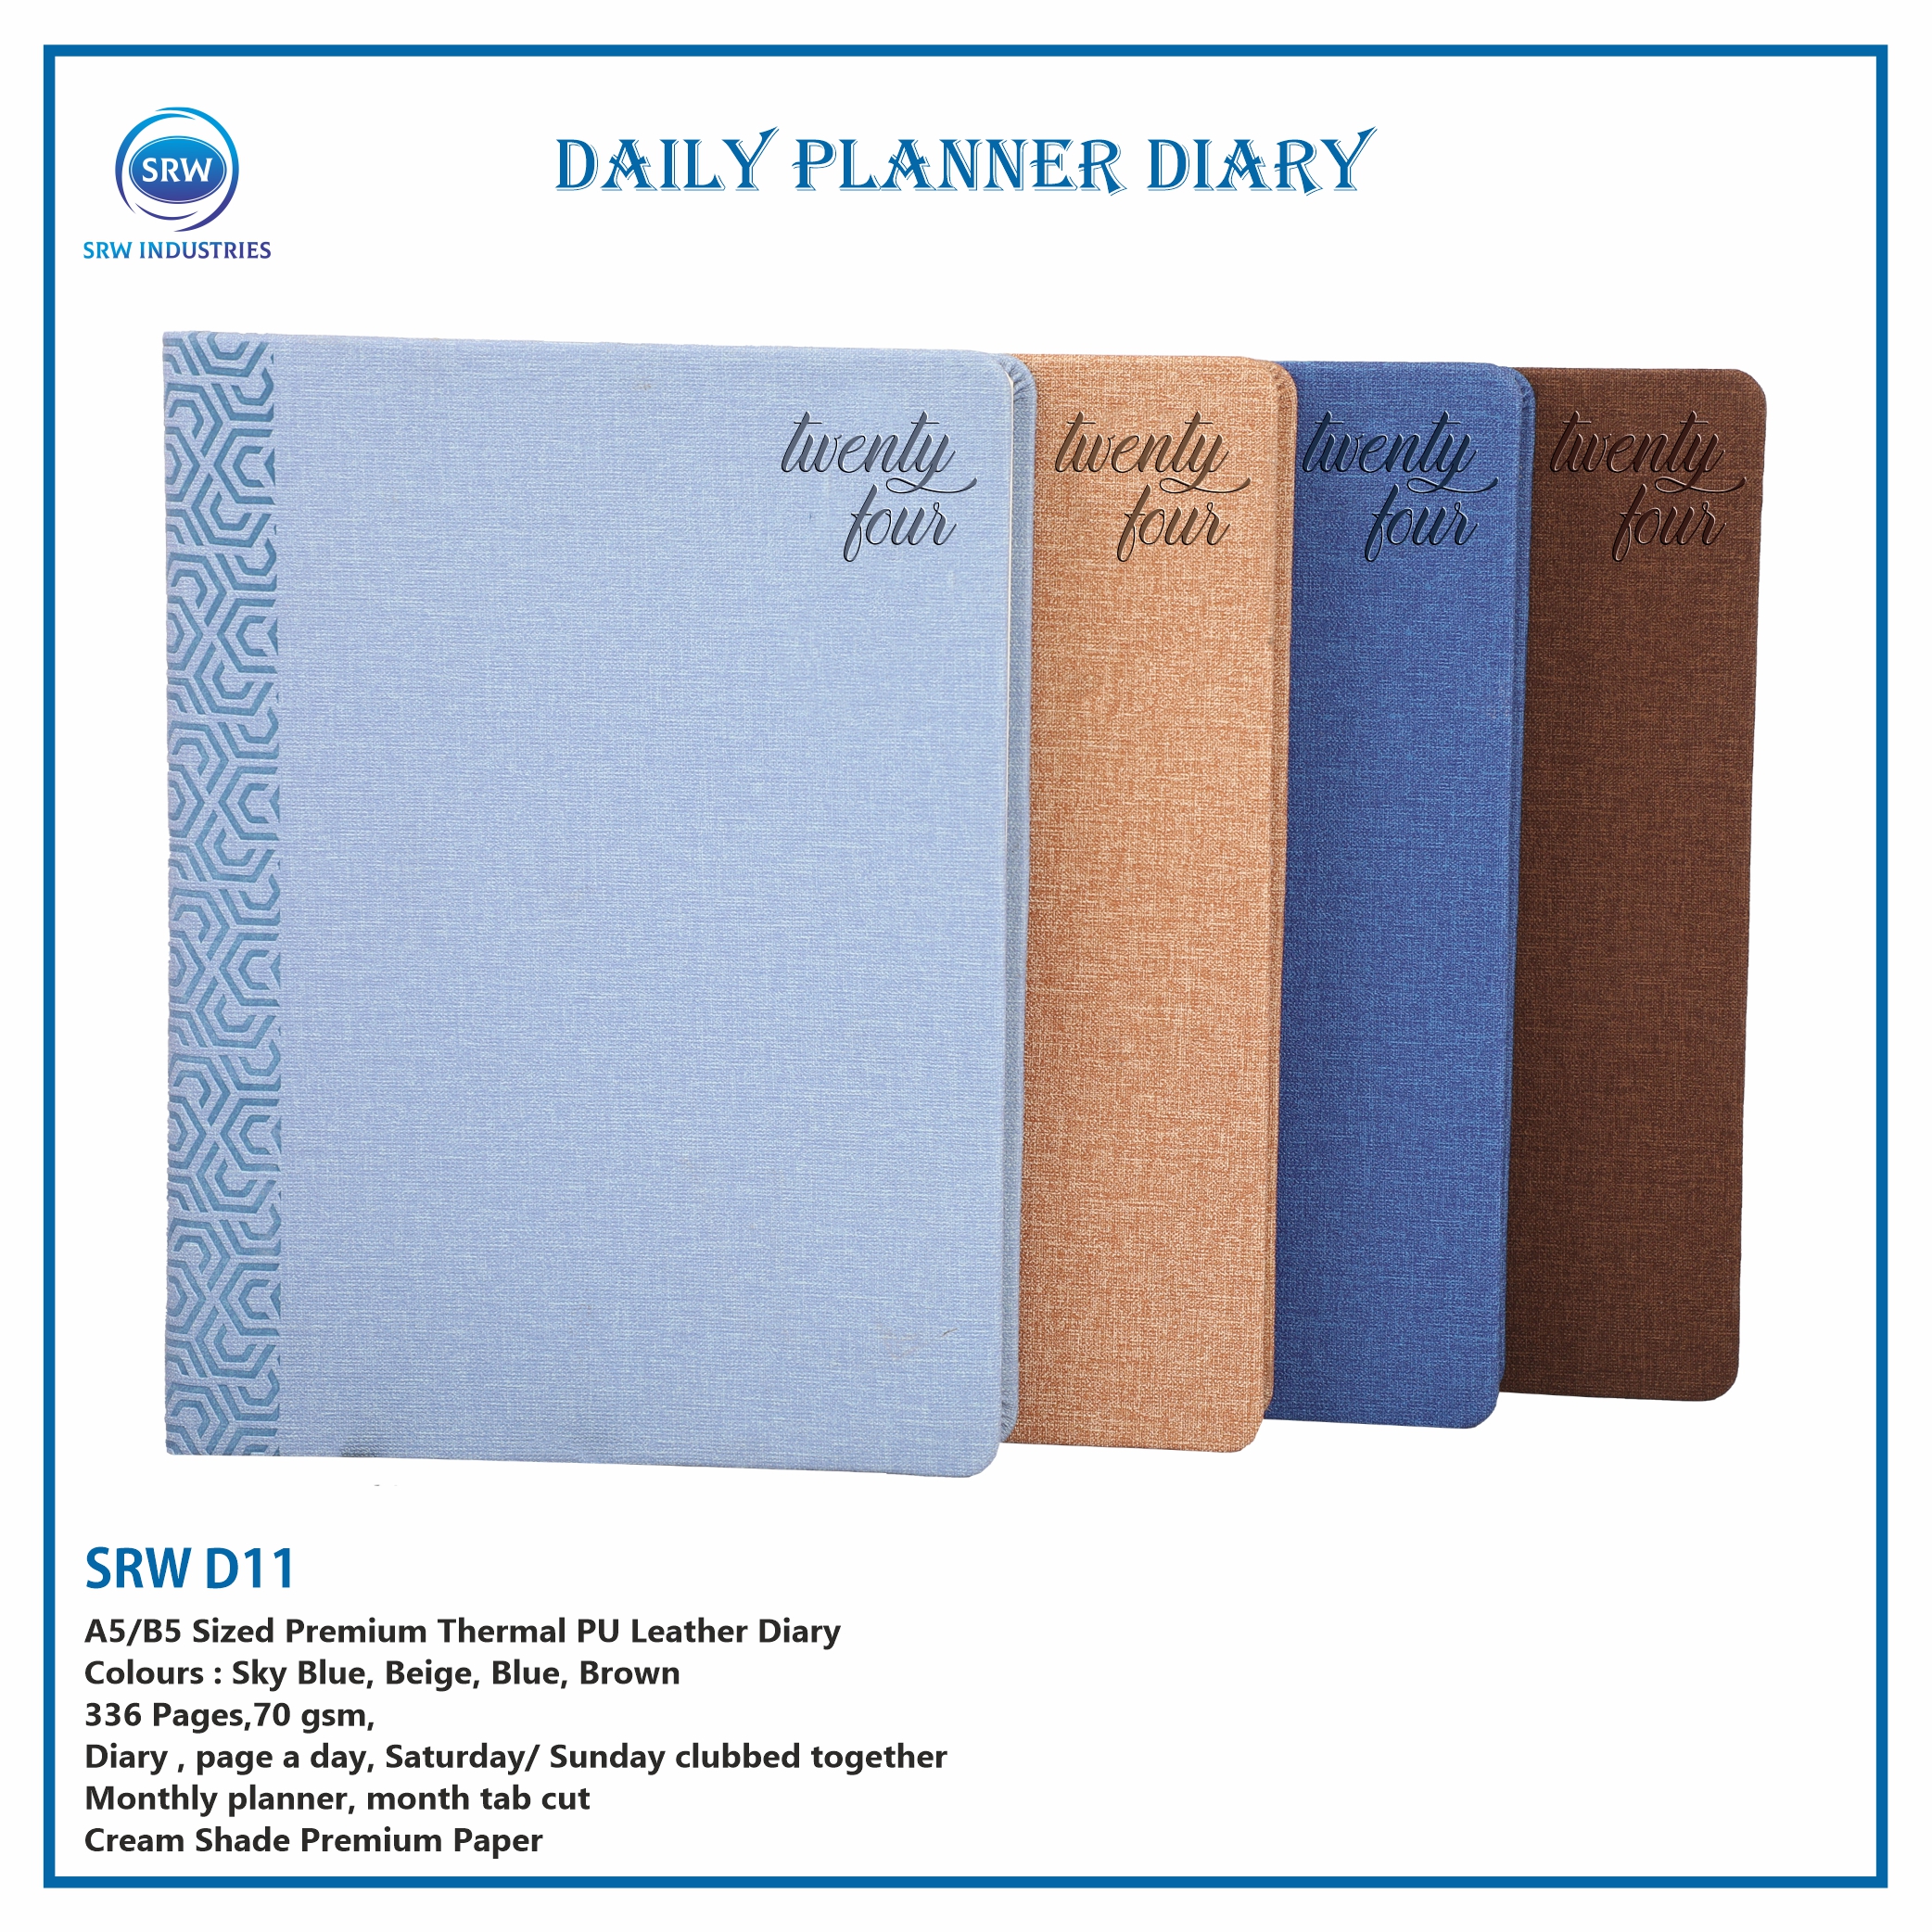 Daily Planner Diary